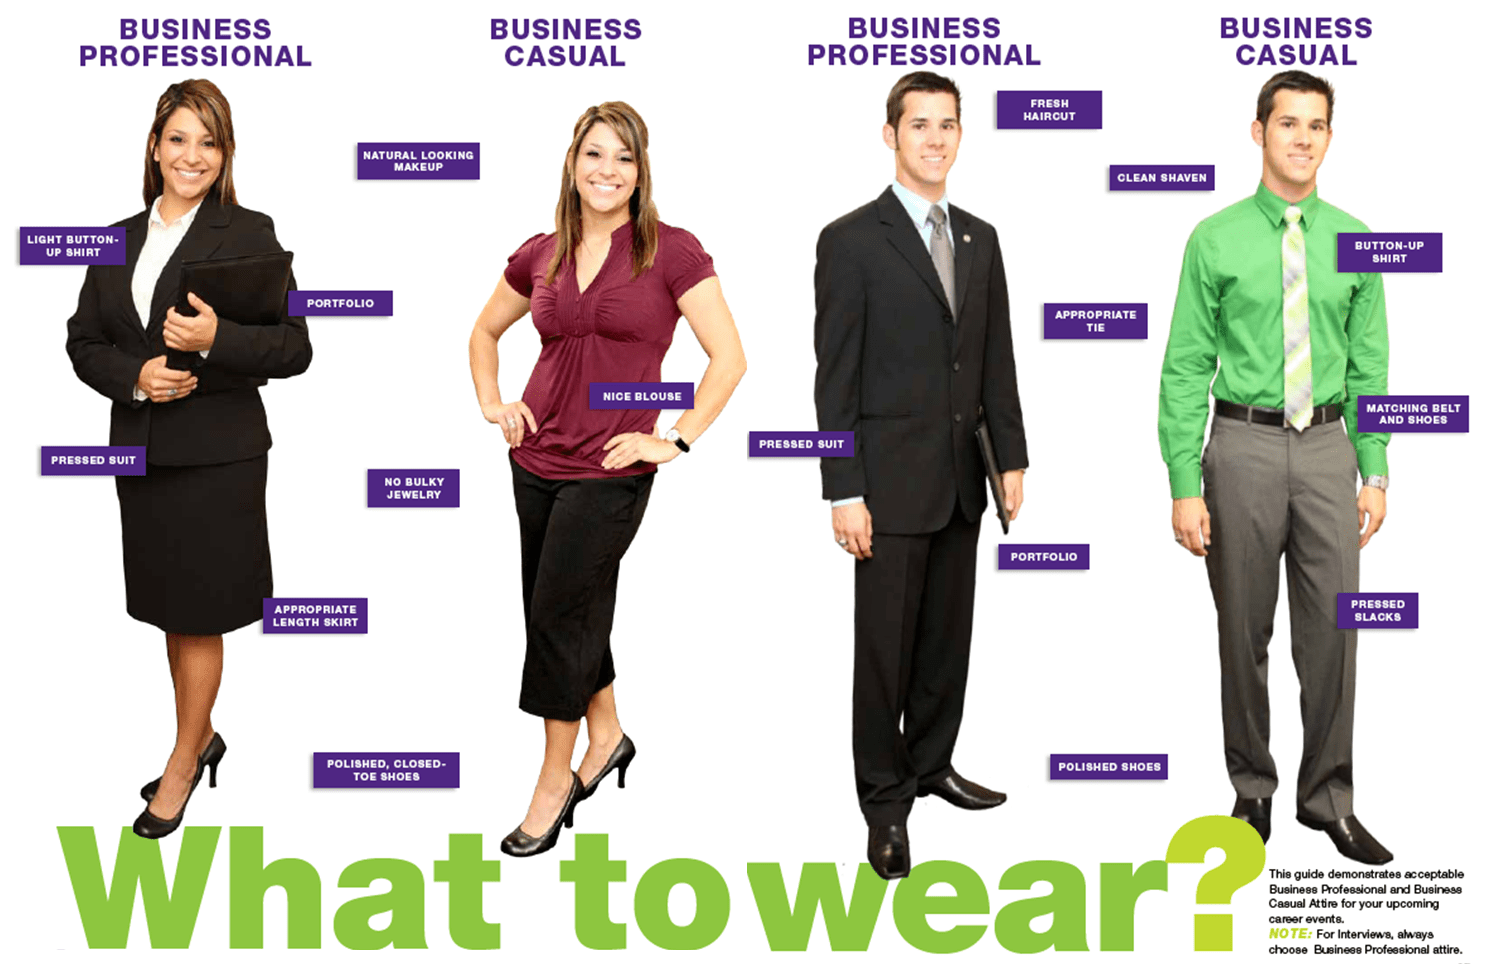 What to wear to an interview - Paxus recruitment blog